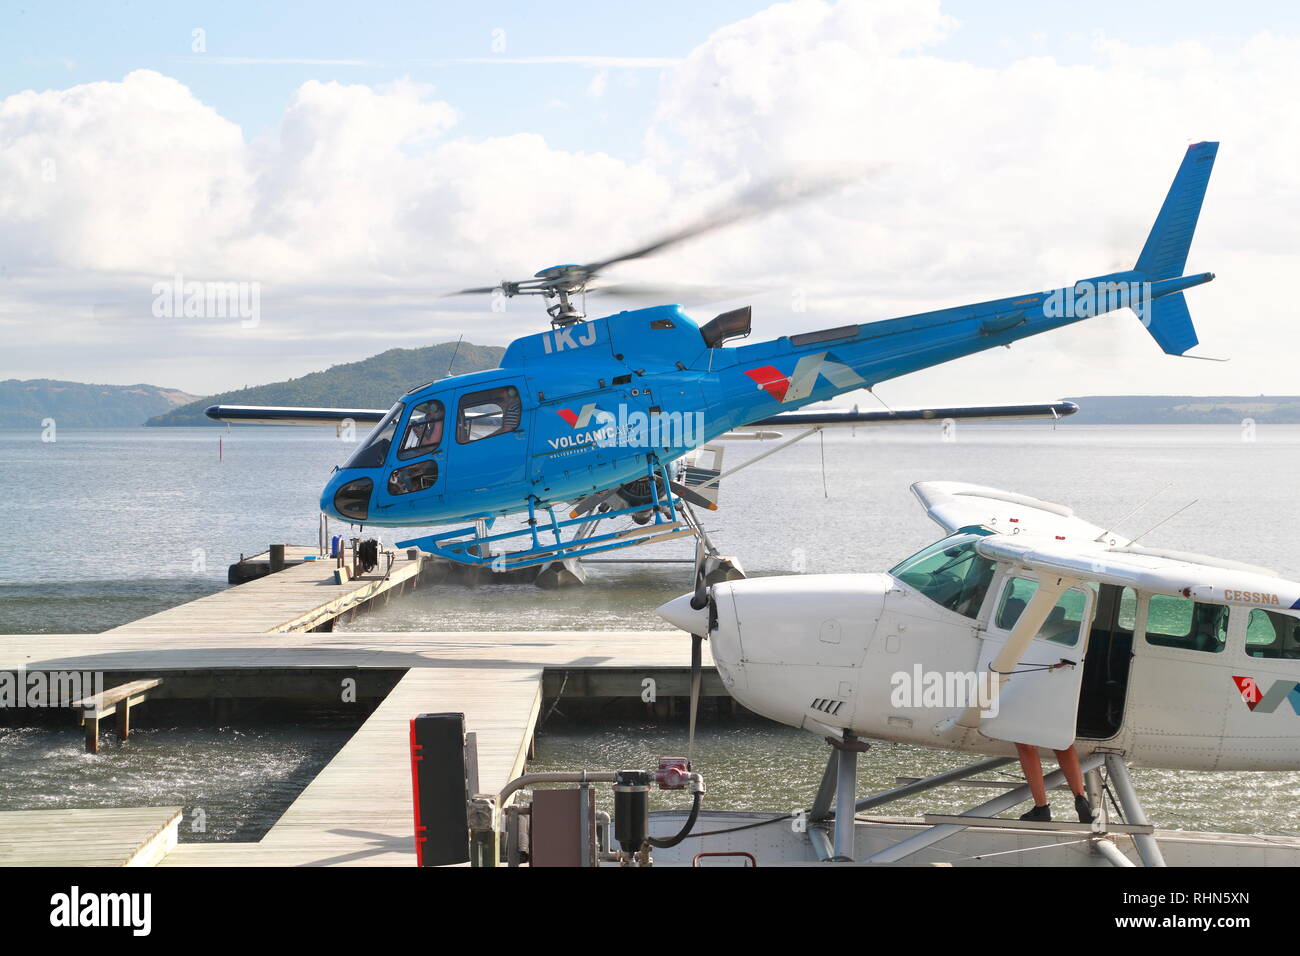 Tourists can visit the volcanic White Island by helicopter from Lake Rotorua, New Zealand Stock Photo